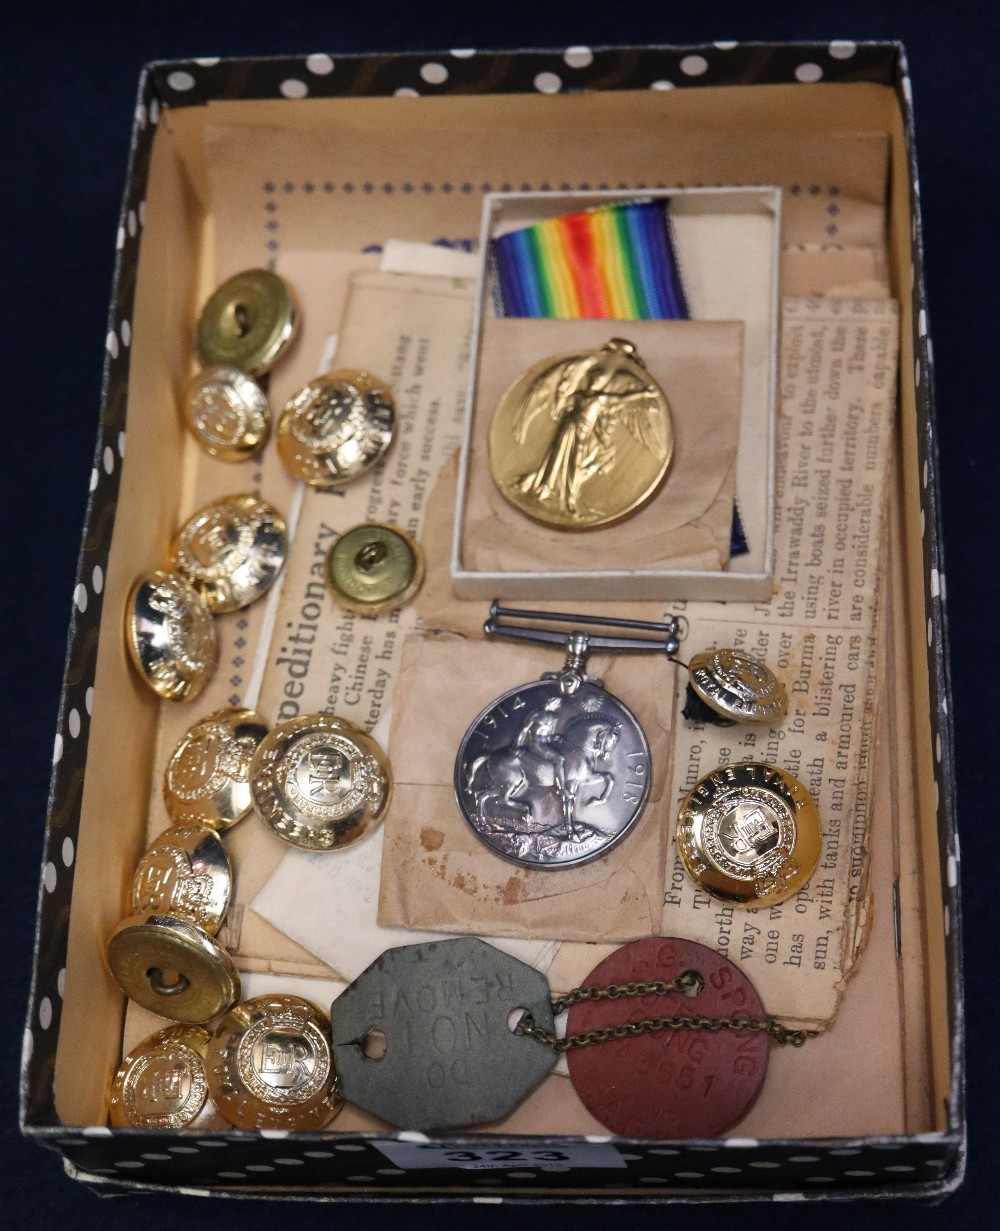 Group of First World War medals awarded to Private H.